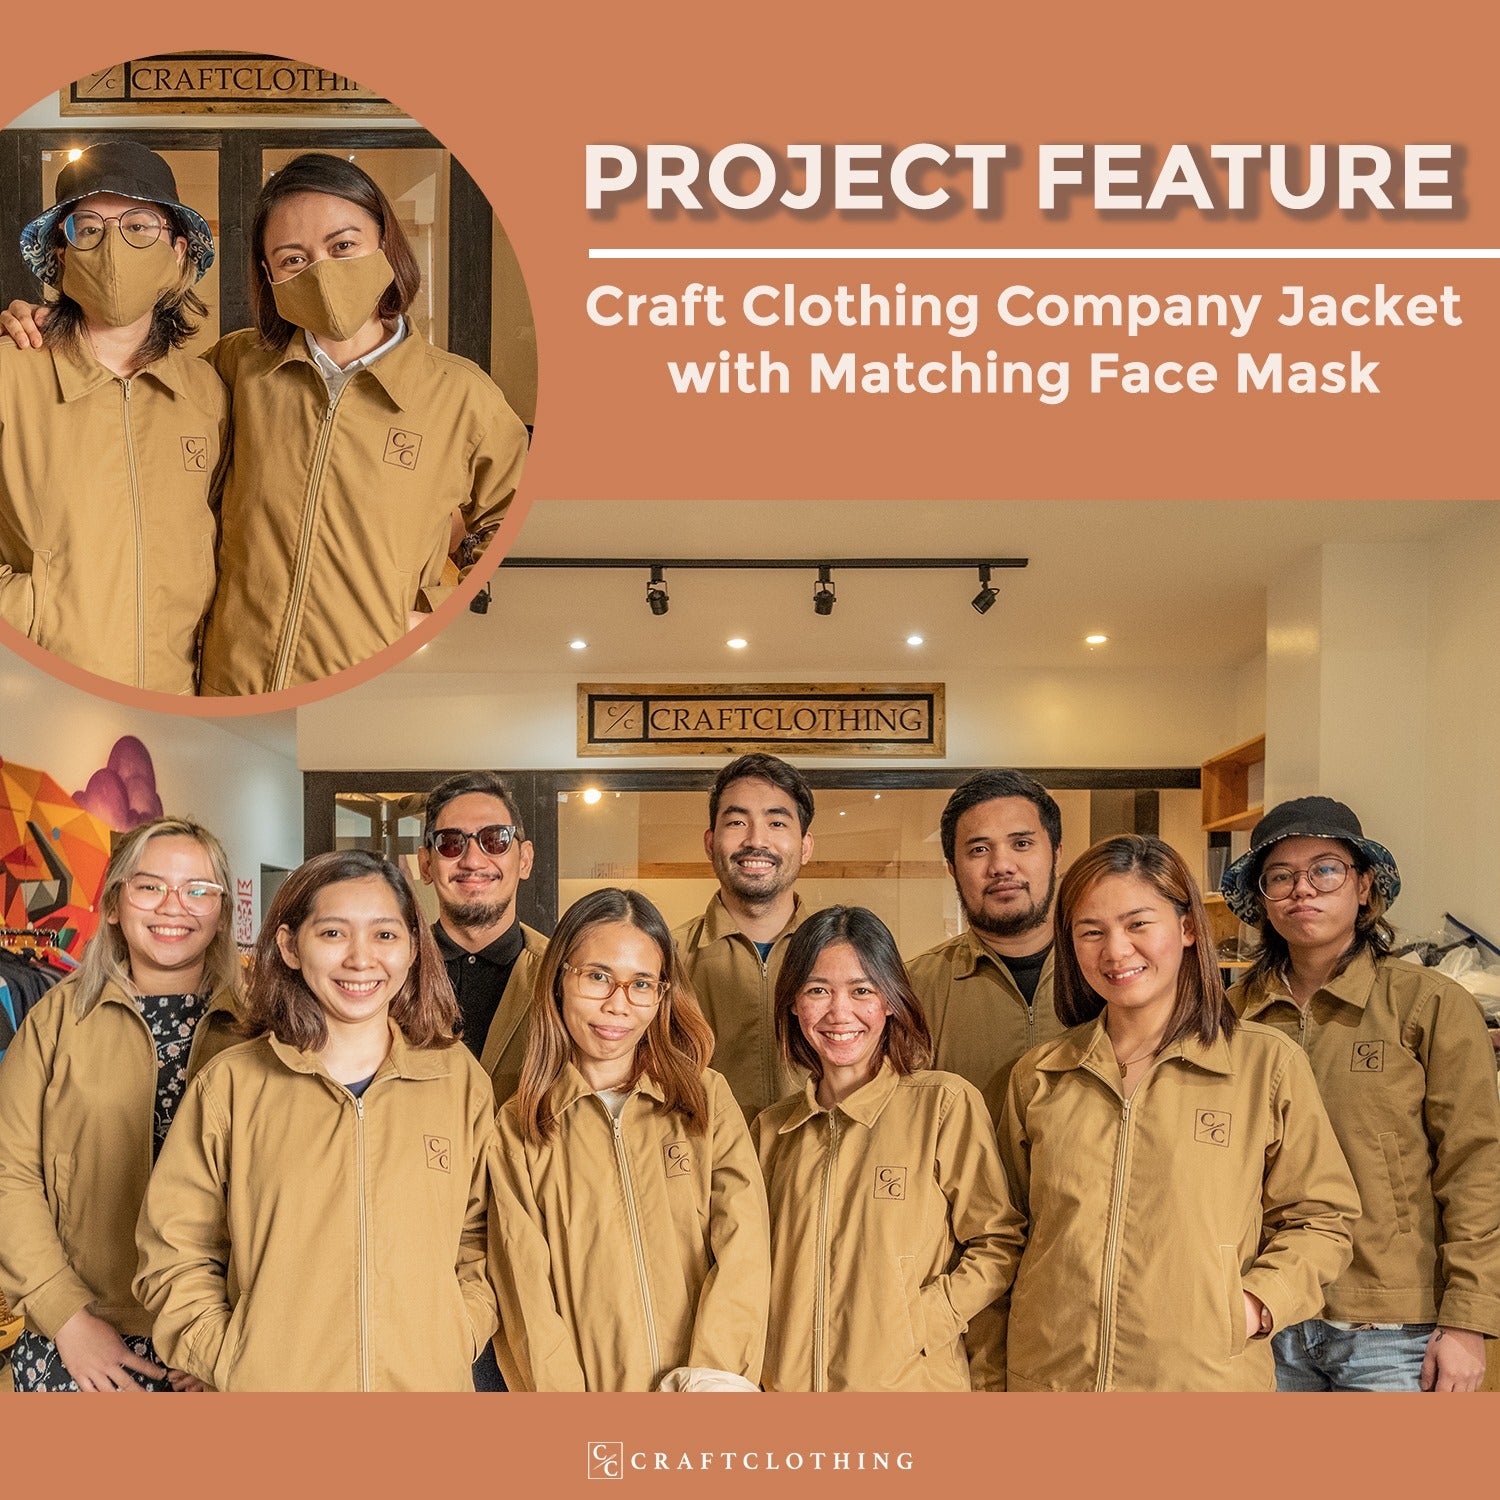 FRIDAY PROJECT FEATURE OF THE WEEK: CRAFT CLOTHING COMPANY JACKET WITH MATCHING FACE MASK